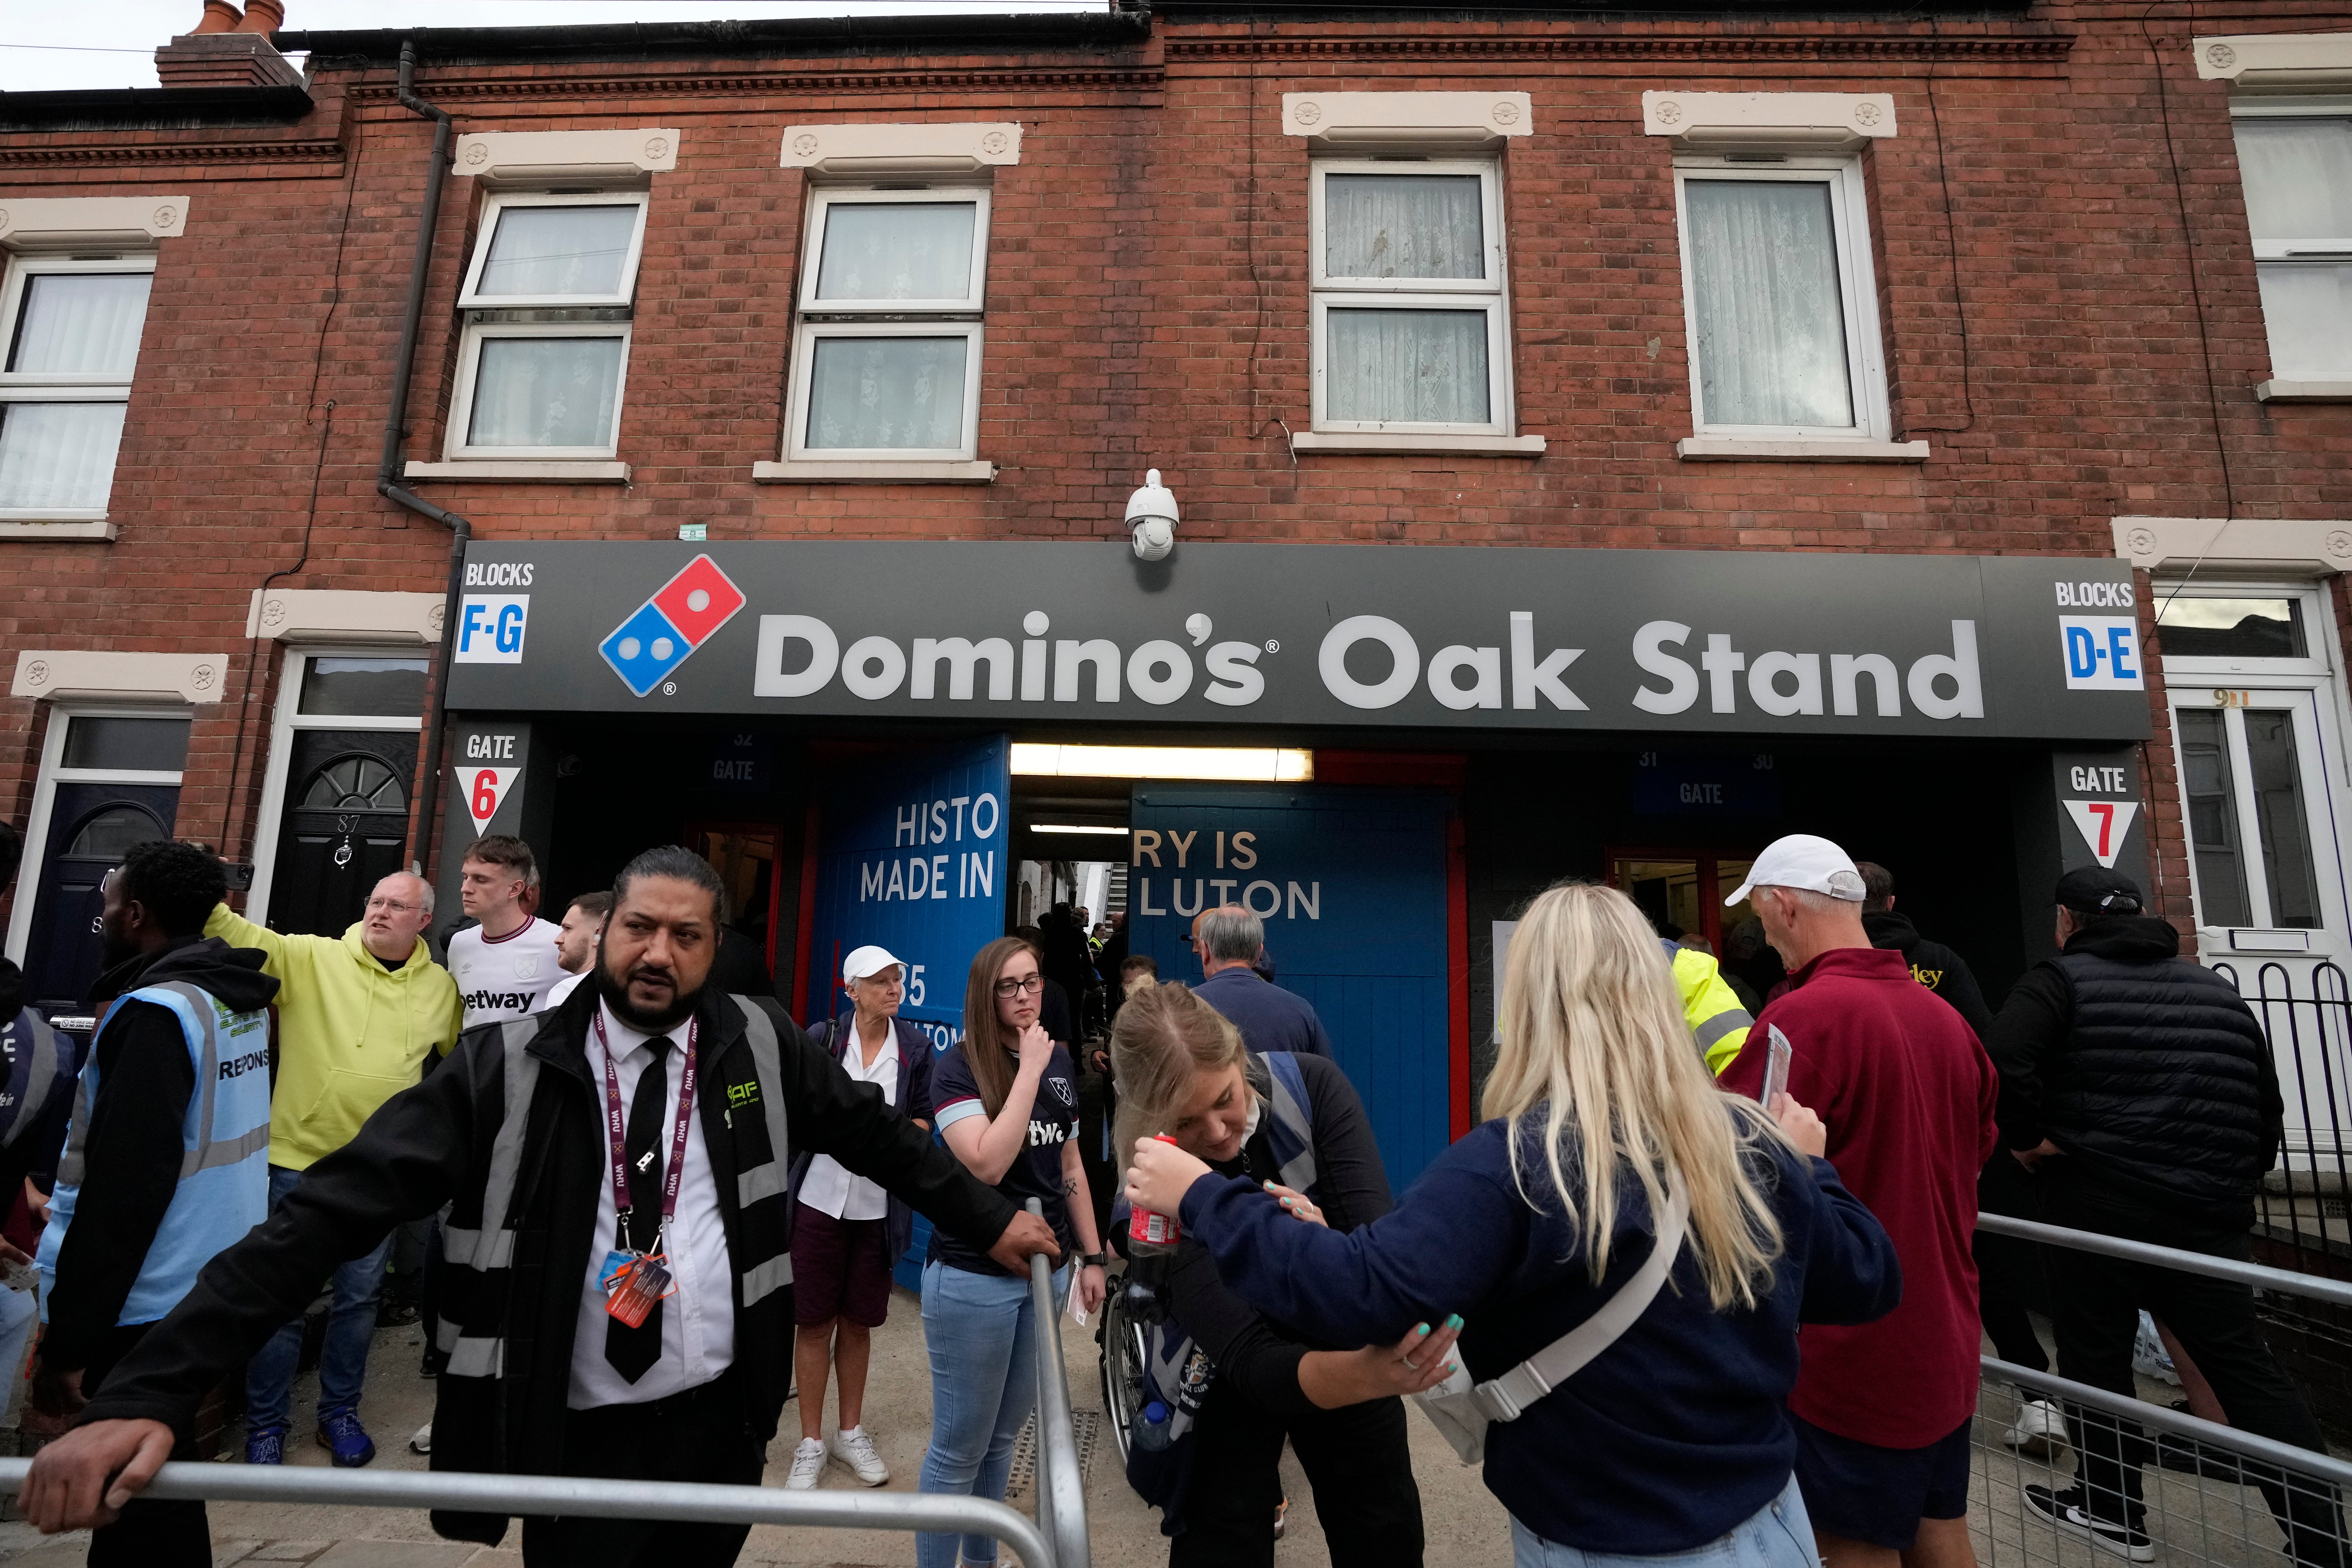 The Oak Stand at Kenilworth Road had an unusual entrance